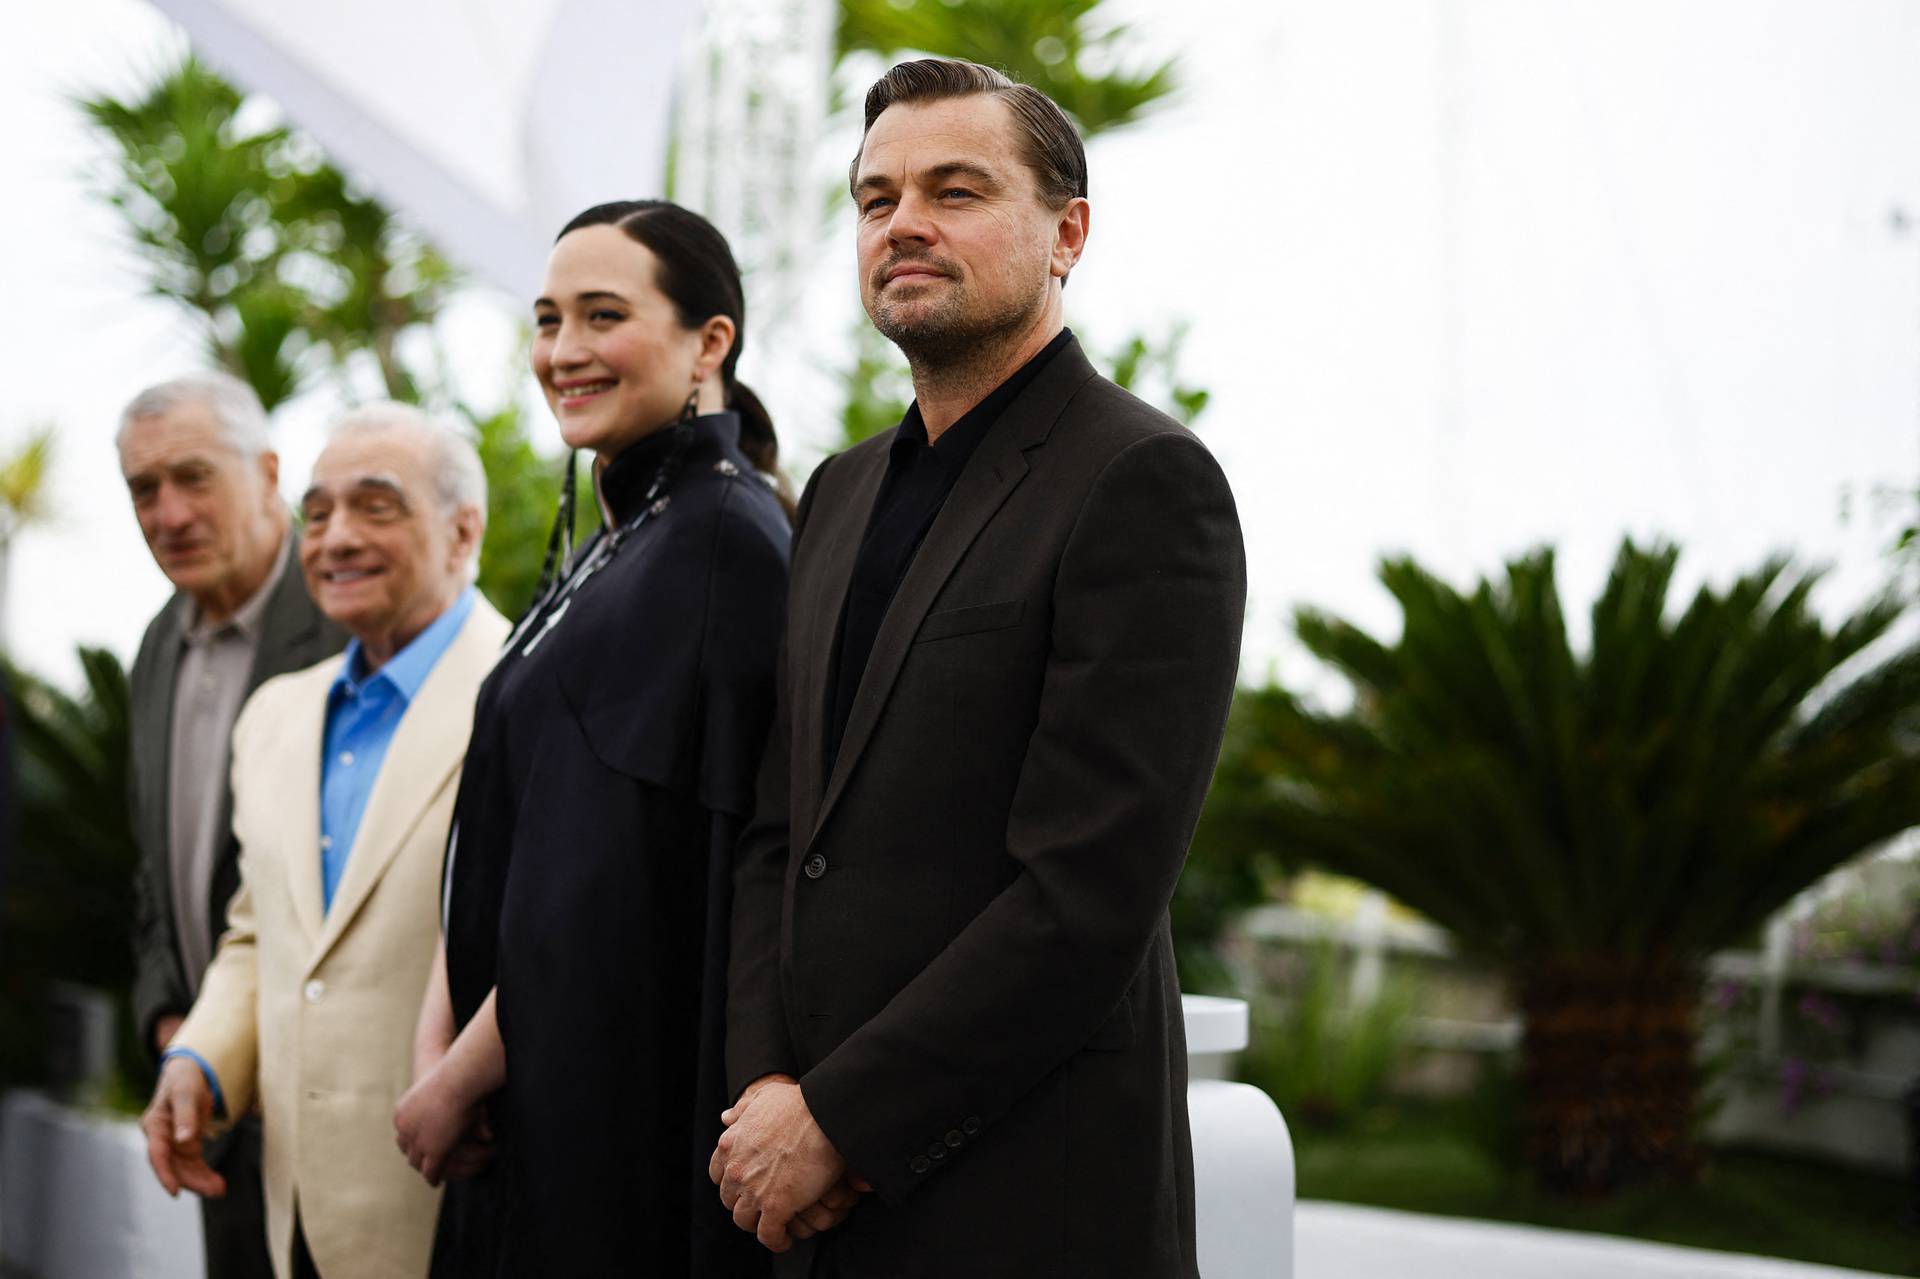 The 76th Cannes Film Festival - Photocall for the film "Killers of the Flower Moon" Out of Competition